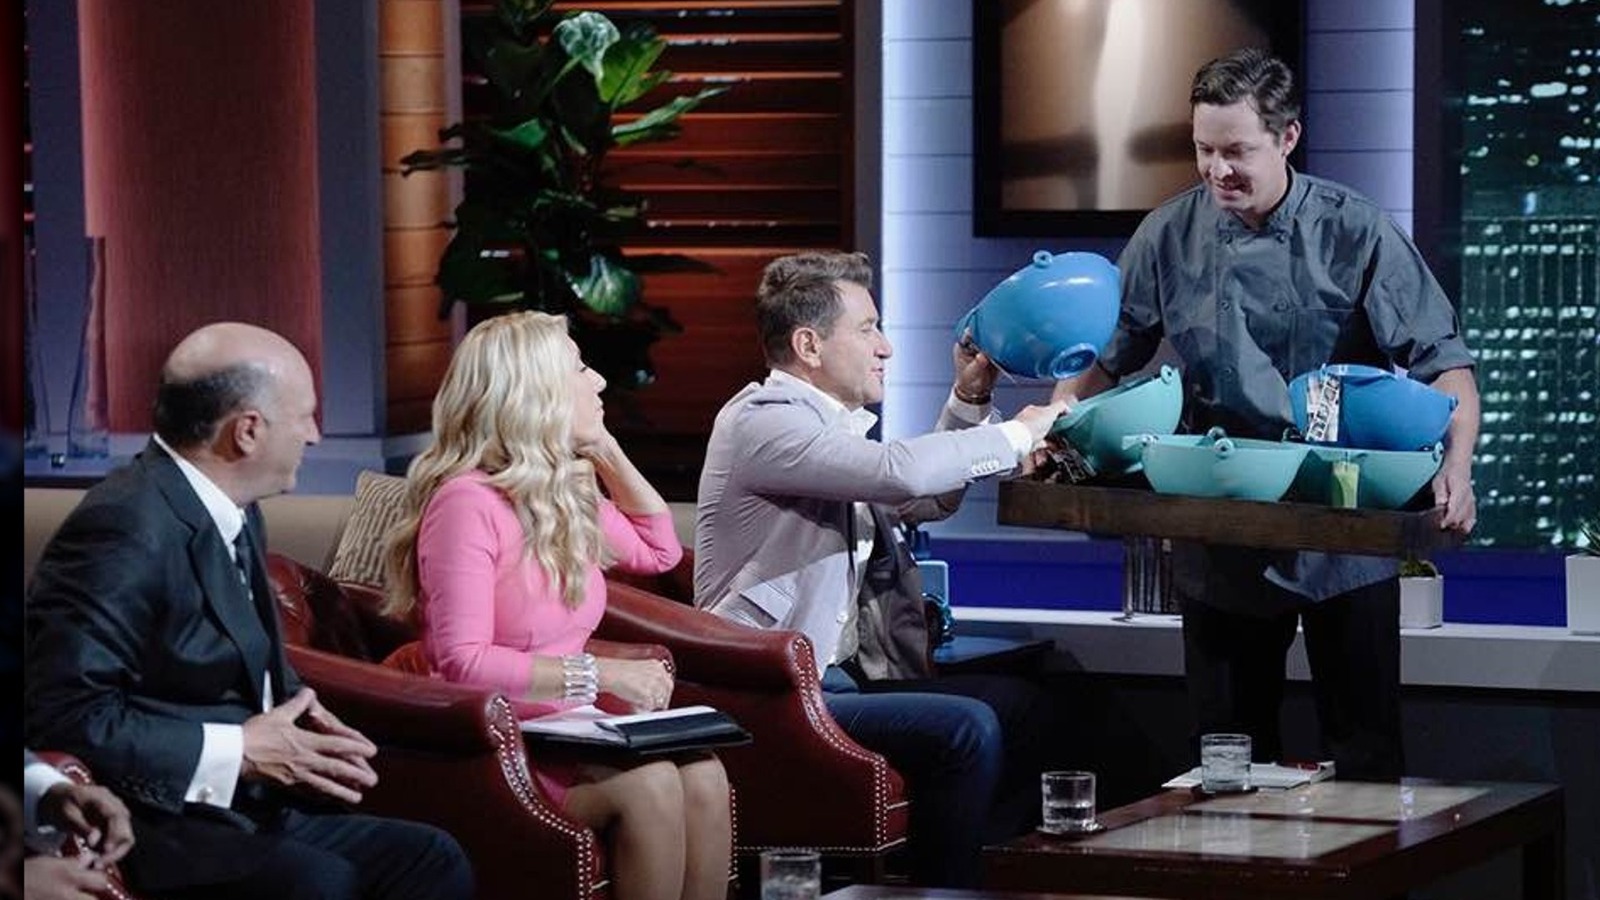 What Happened To Peoples Design Scooping Bowl From Shark Tank?